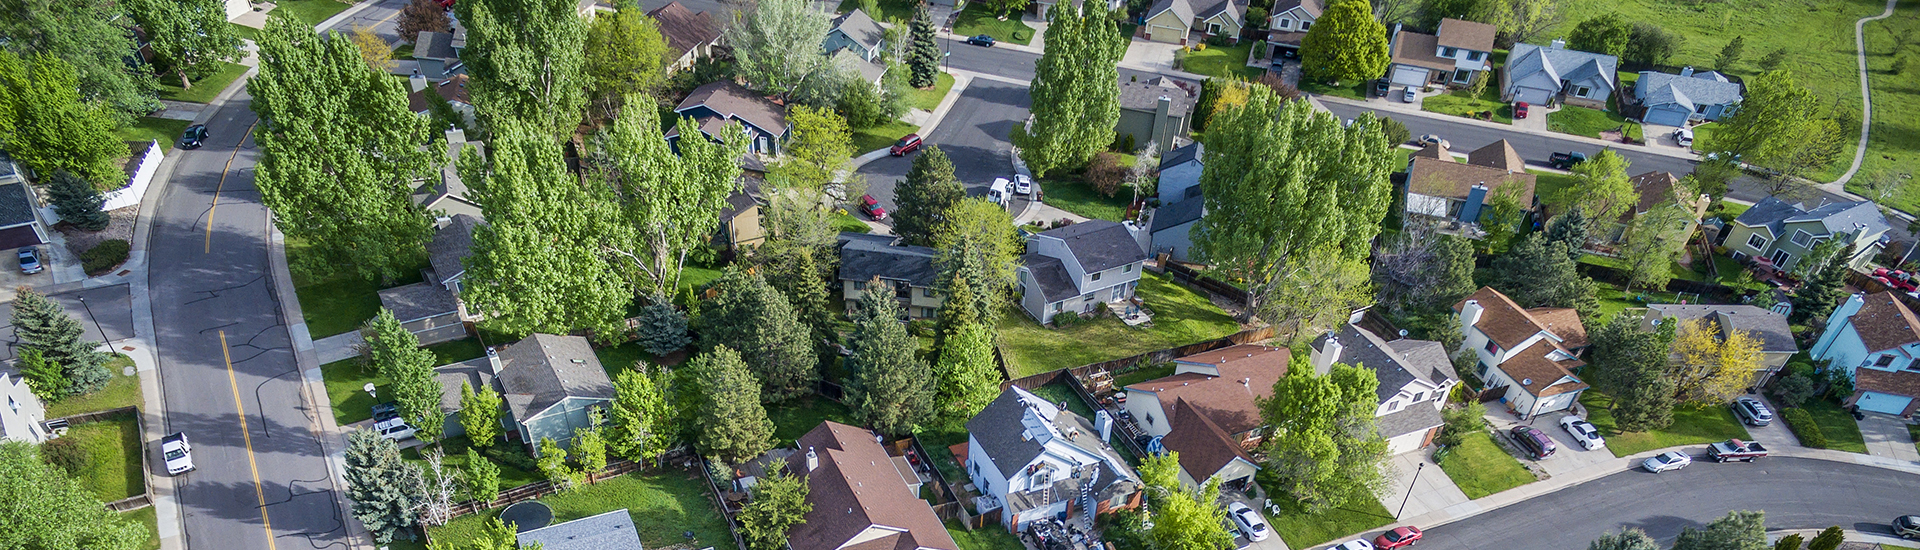 Aerial view of typical residential neighborhood along Front Range of Rocky Mountains in Colorado